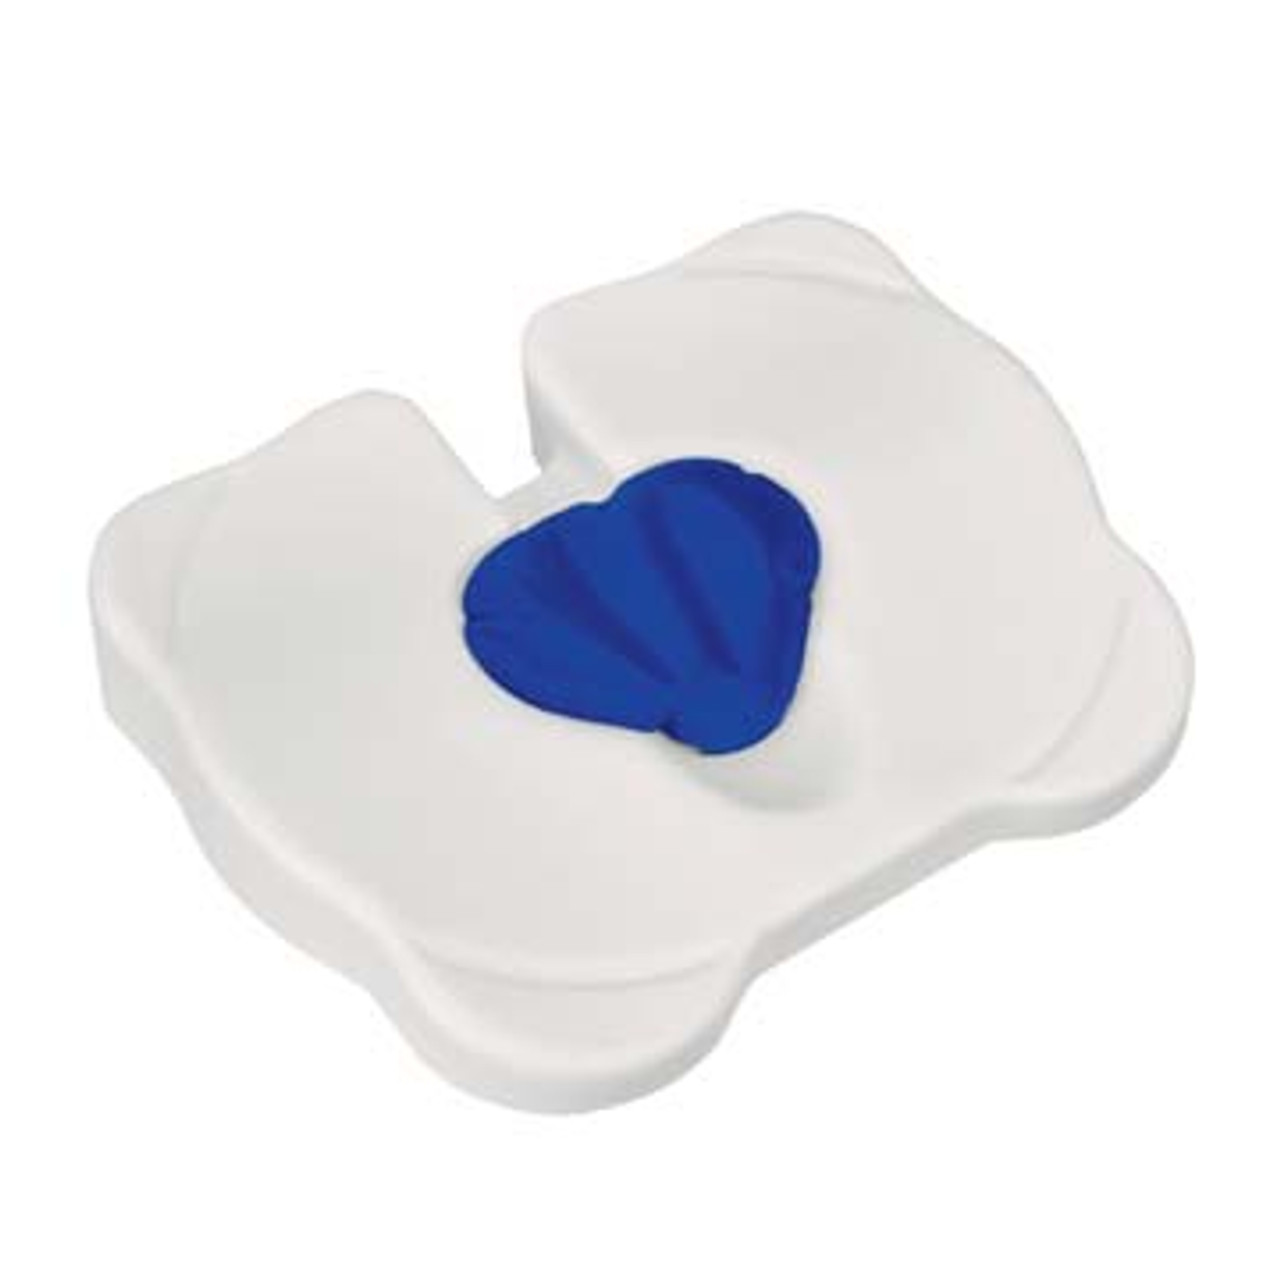 Contour Kabooti Donut & Tailbone Seat Cushion for Seating Relief